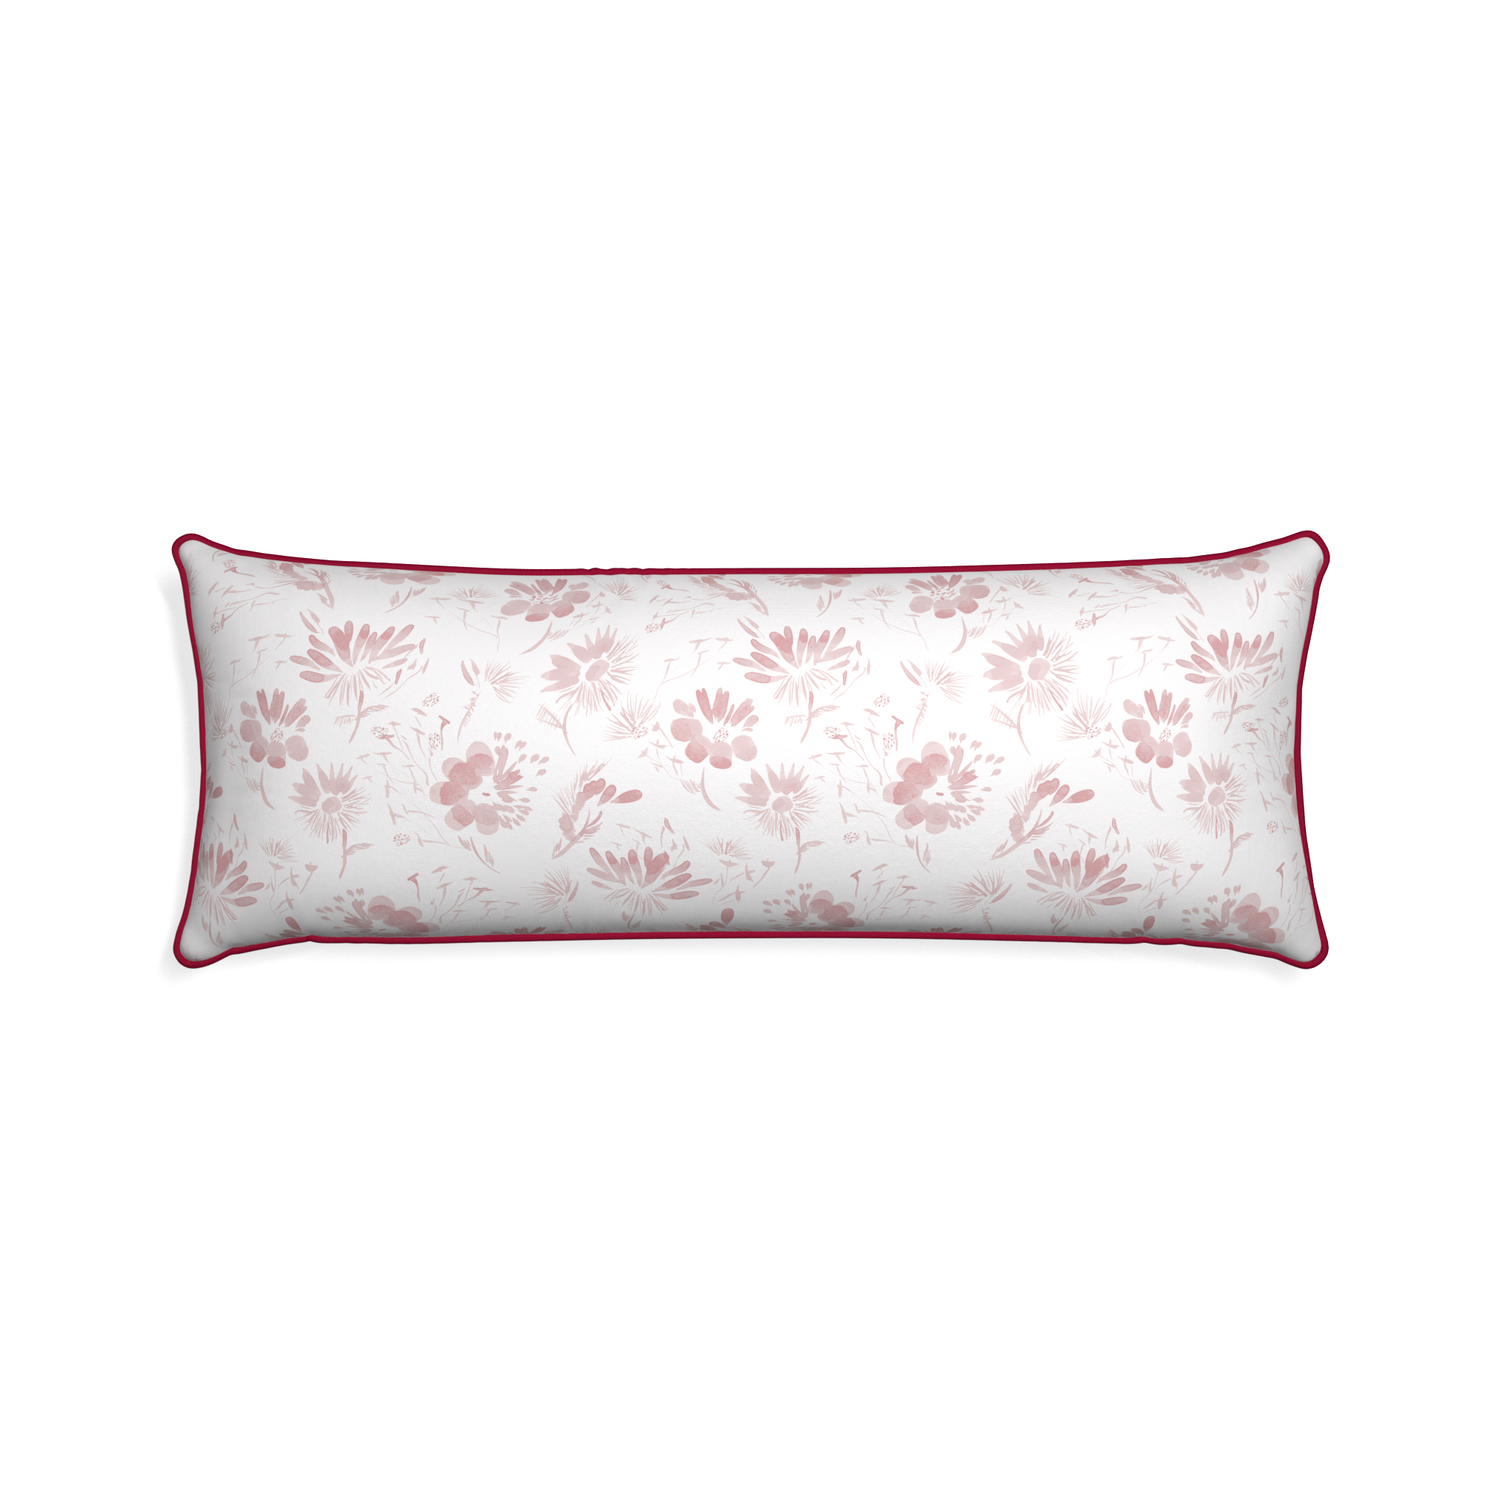 Xl-lumbar blake custom pink floralpillow with raspberry piping on white background